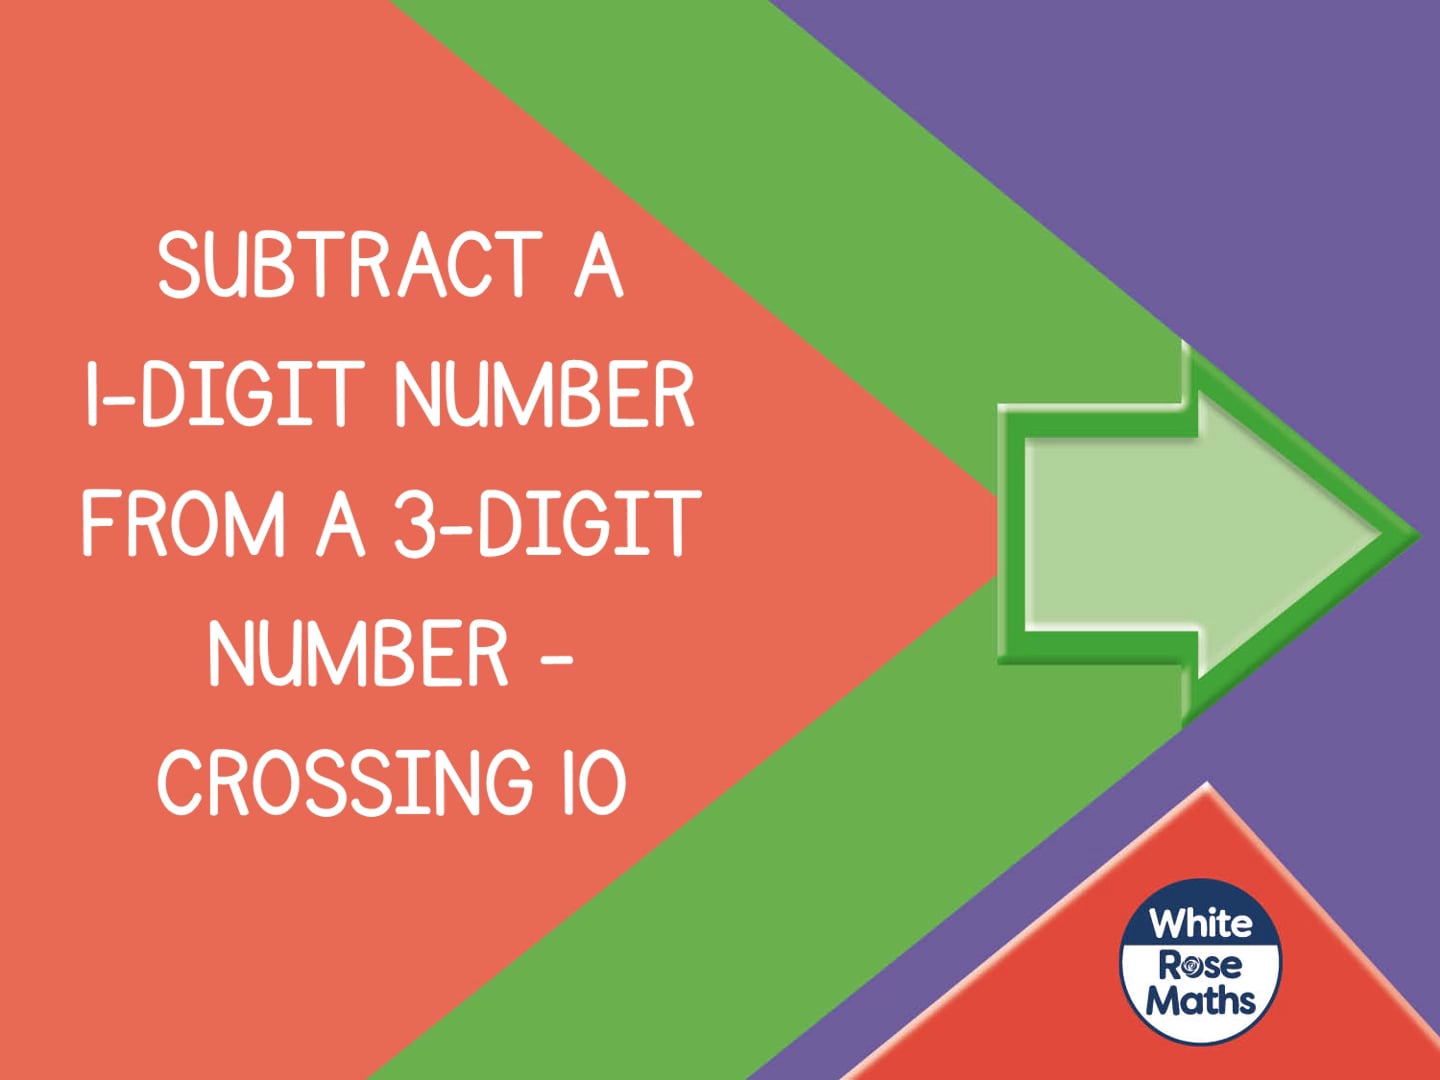 Aut3 5 2 Subtract A 1 digit Number From A 3 digit Number Crossing 